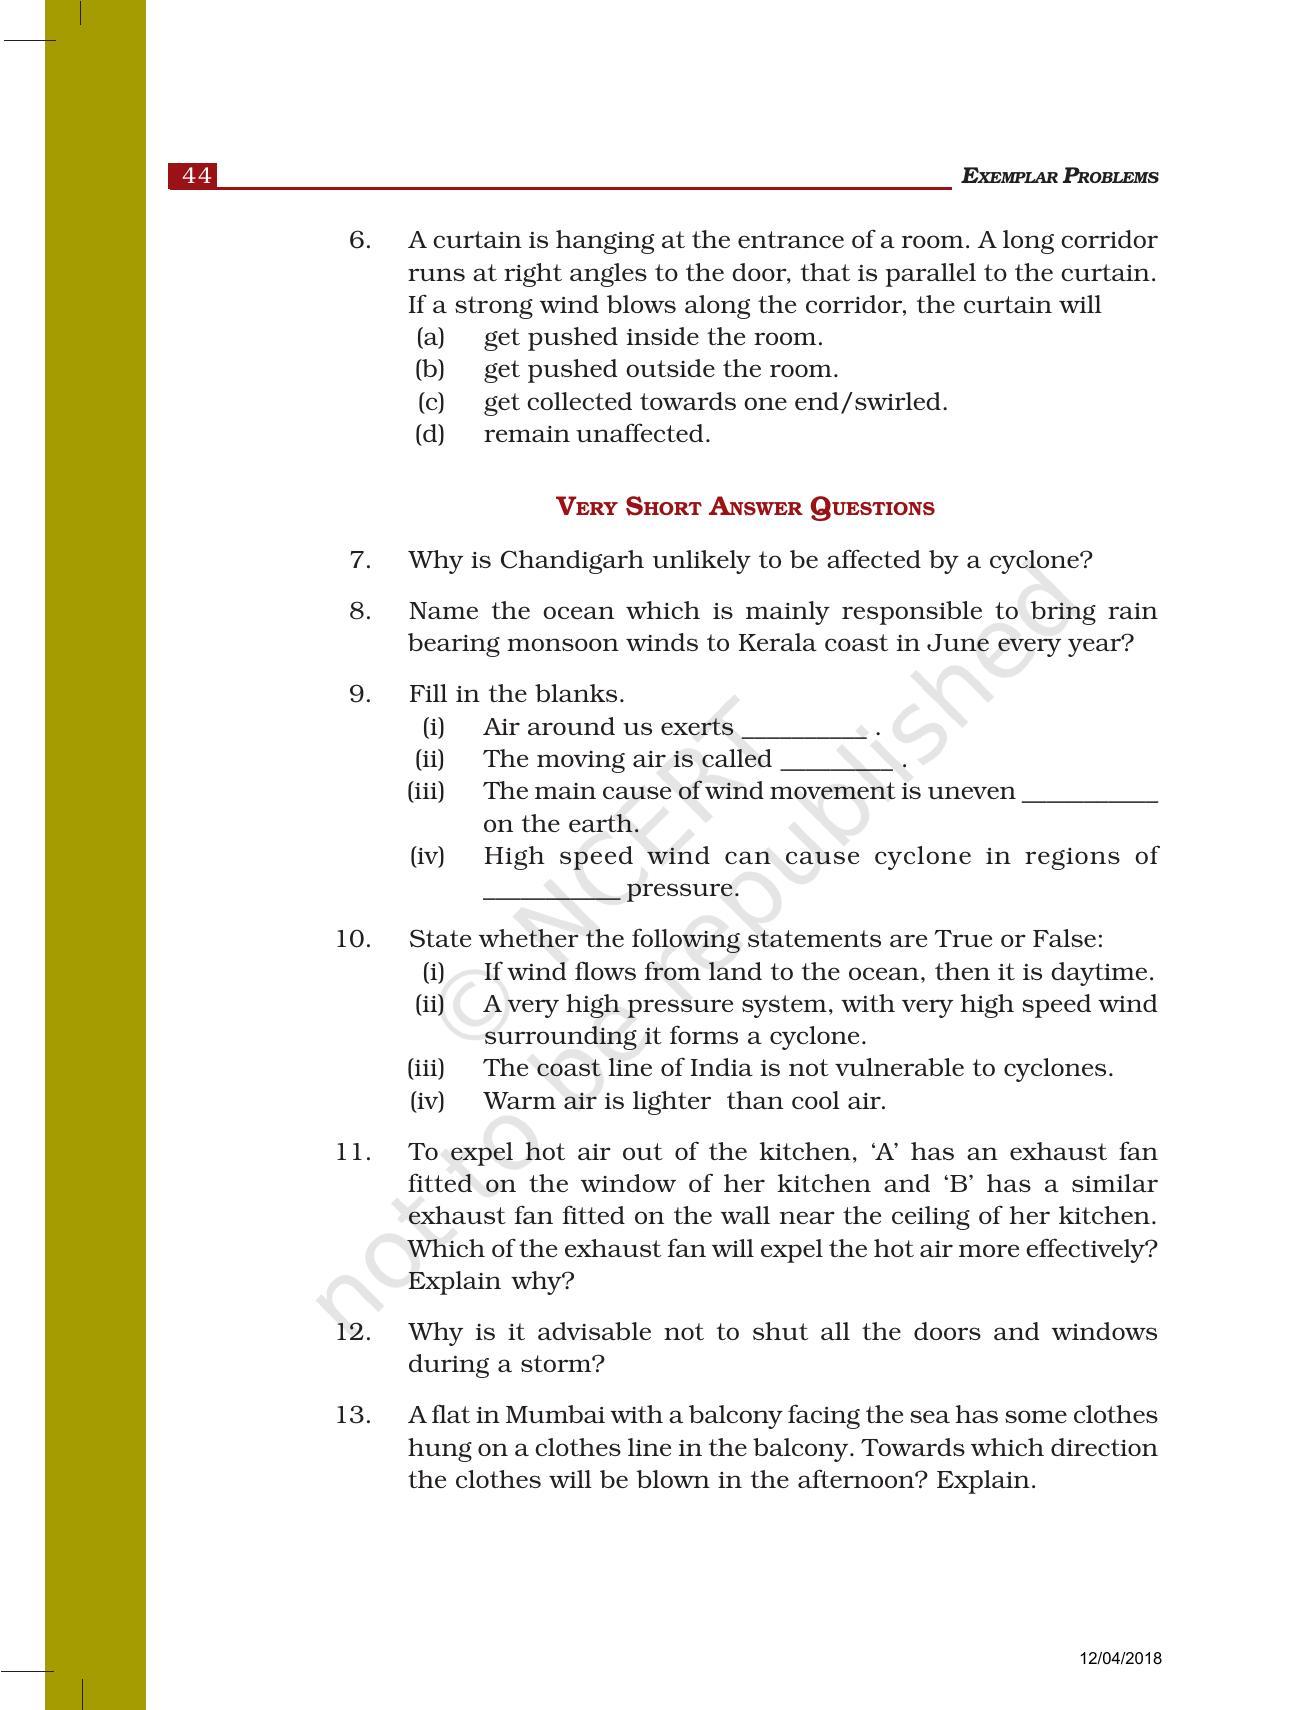 NCERT Exemplar Book for Class 7 Science: Chapter 8-Winds, Storms, and Cyclones - Page 3